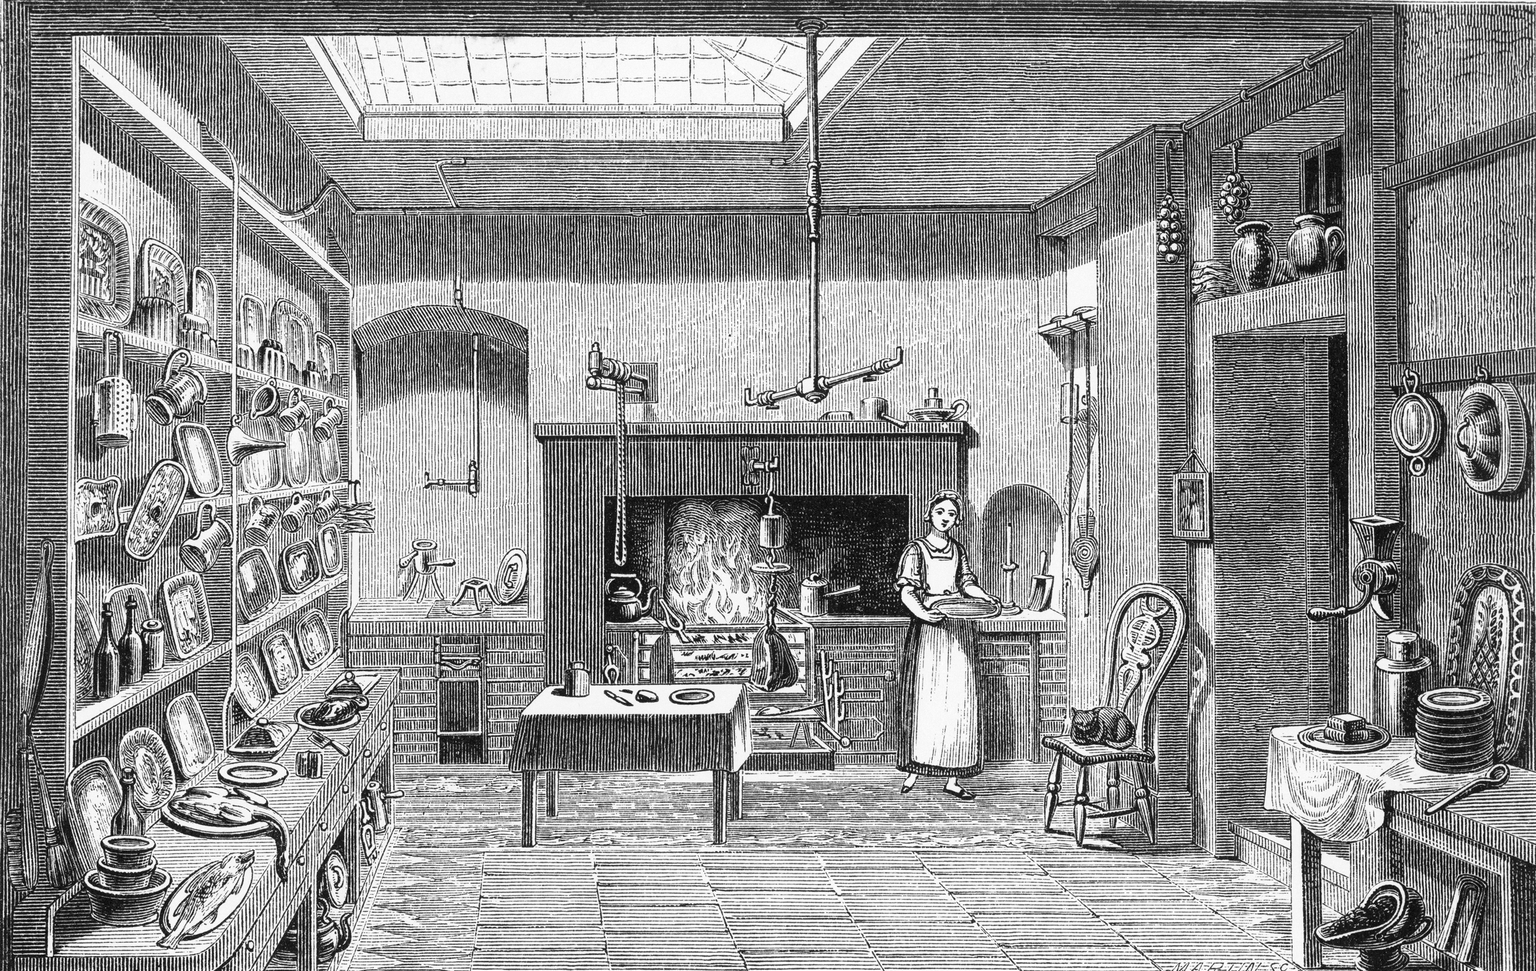 Illustration from Modern Domestic Cookery based on the work of another famous food writer Mrs Rundell, showing a well-equipped Early Victorian kitchen, 1855.